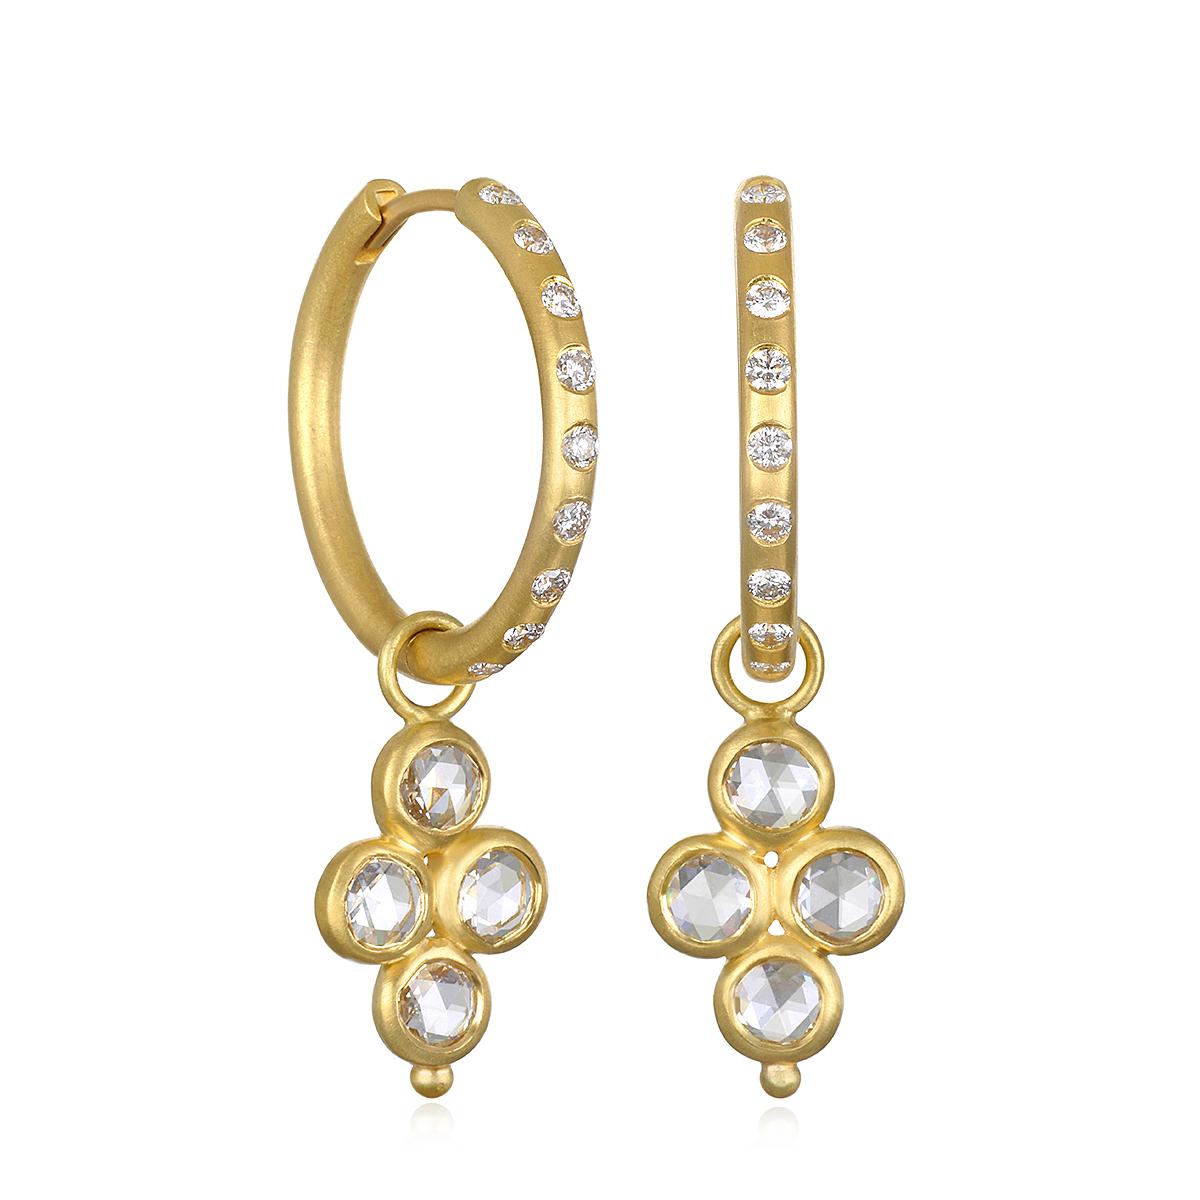 Contemporary Faye Kim 18 Karat Gold Hoops With Pink Sapphire Drops For Sale